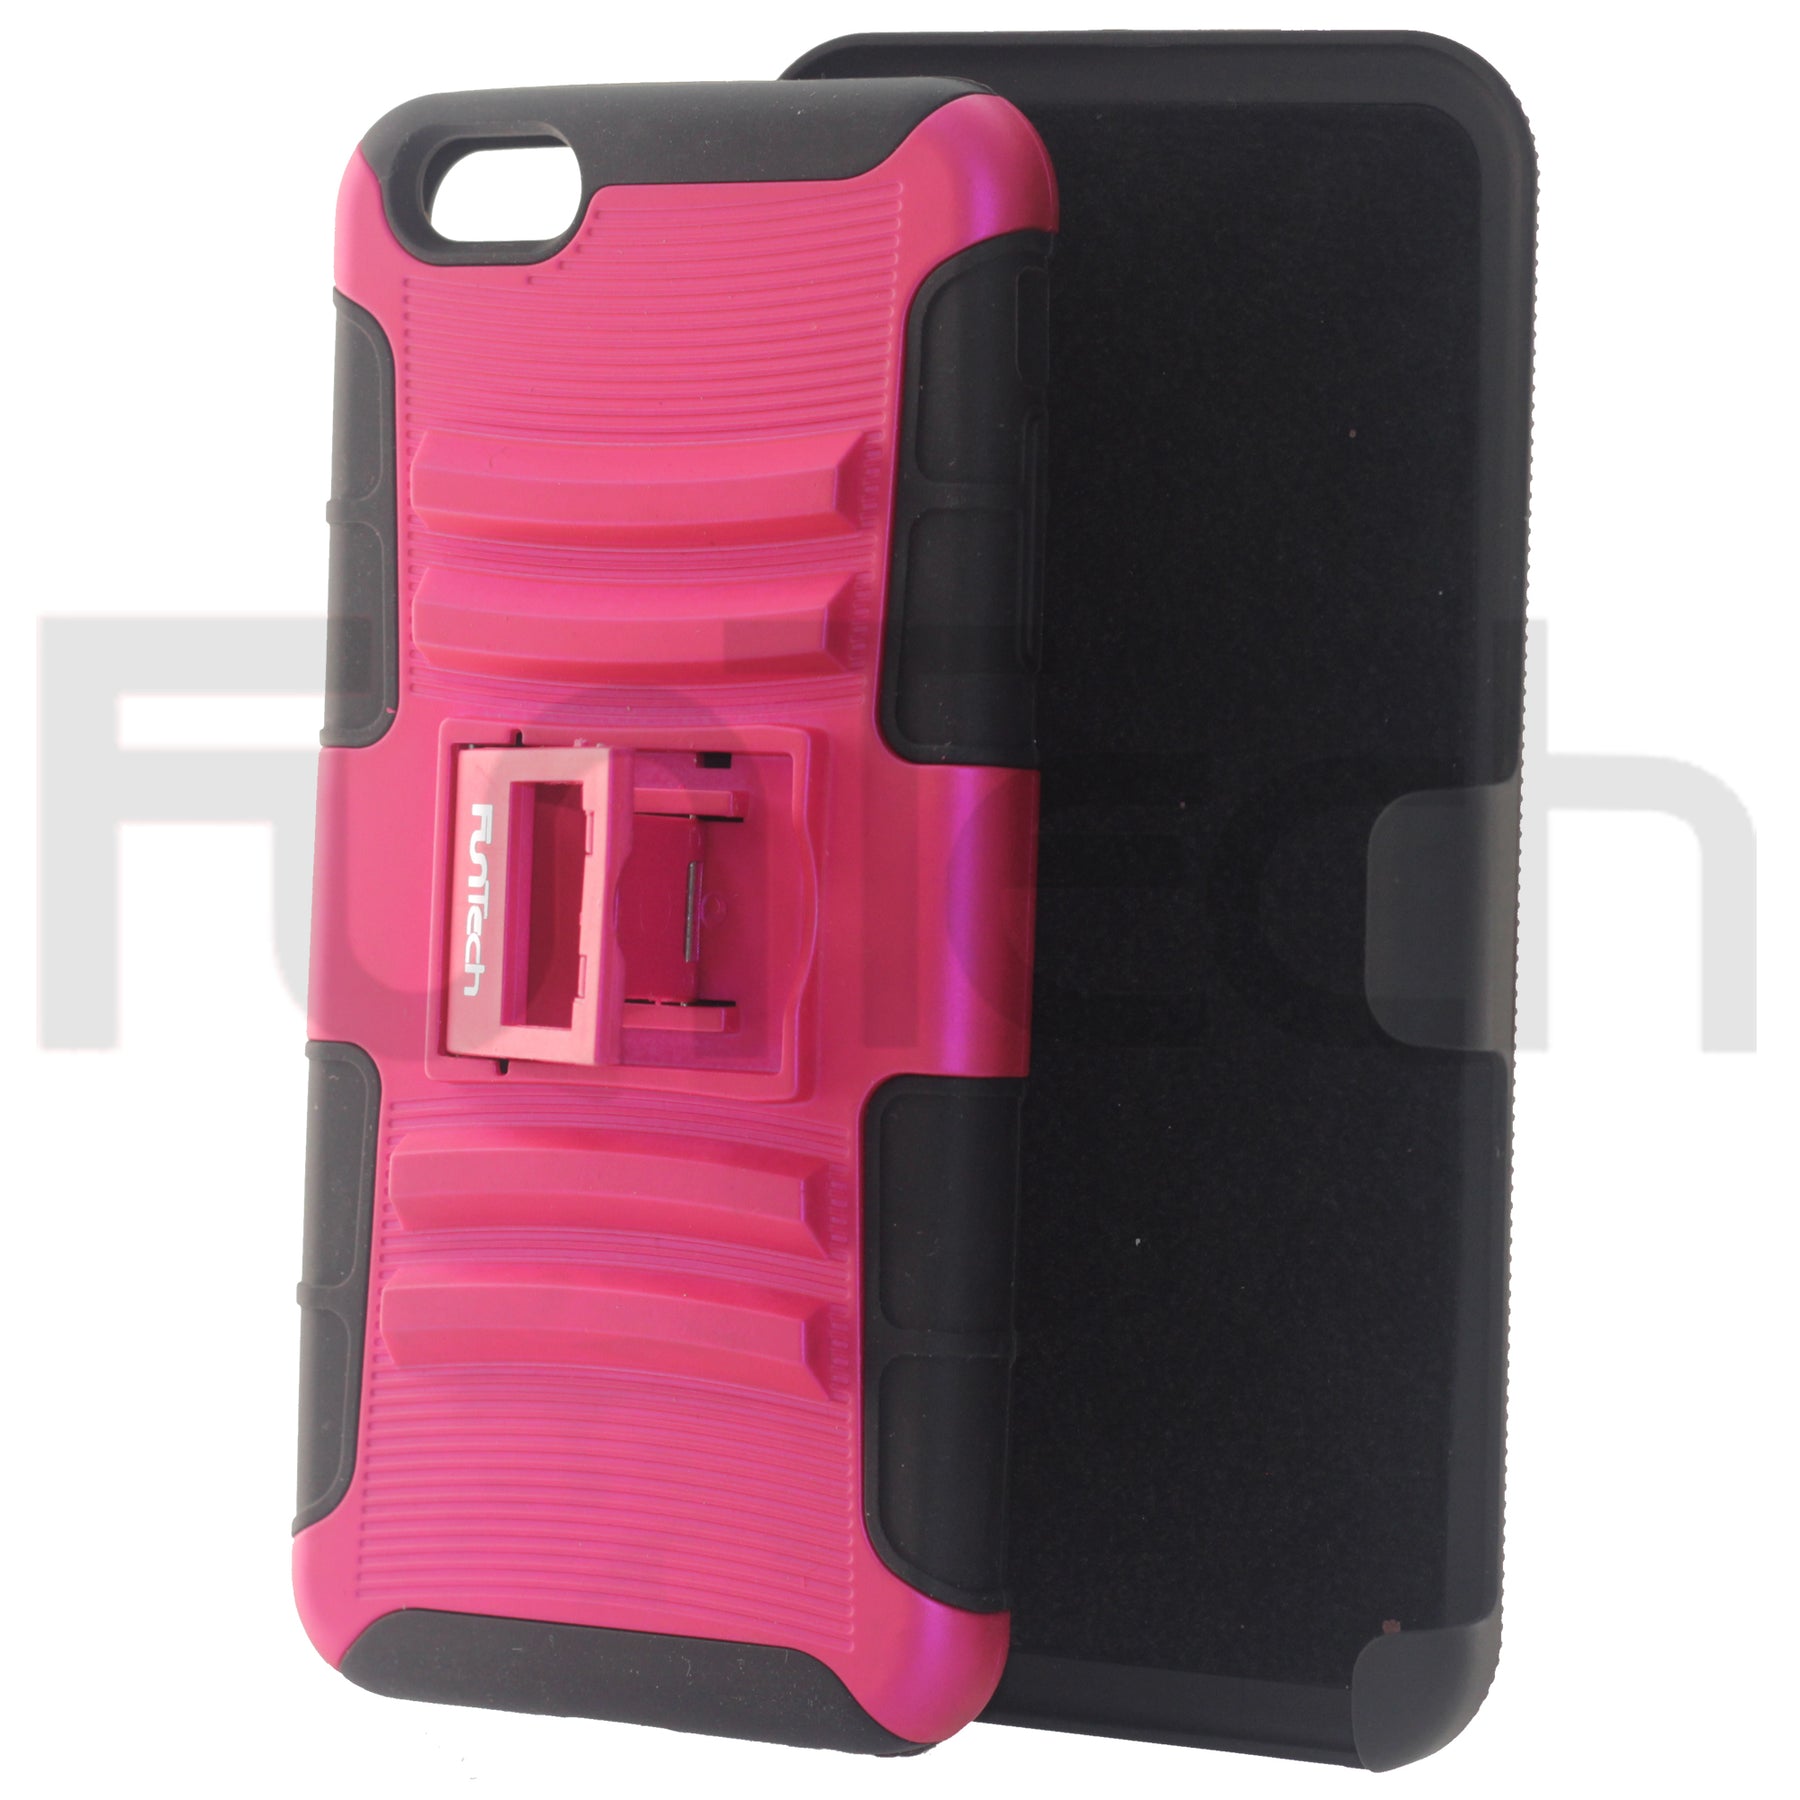 Apple, iPhone 6/6S, 5.5"Rugged Shockproofl Case with Beltclip, Color Pink.